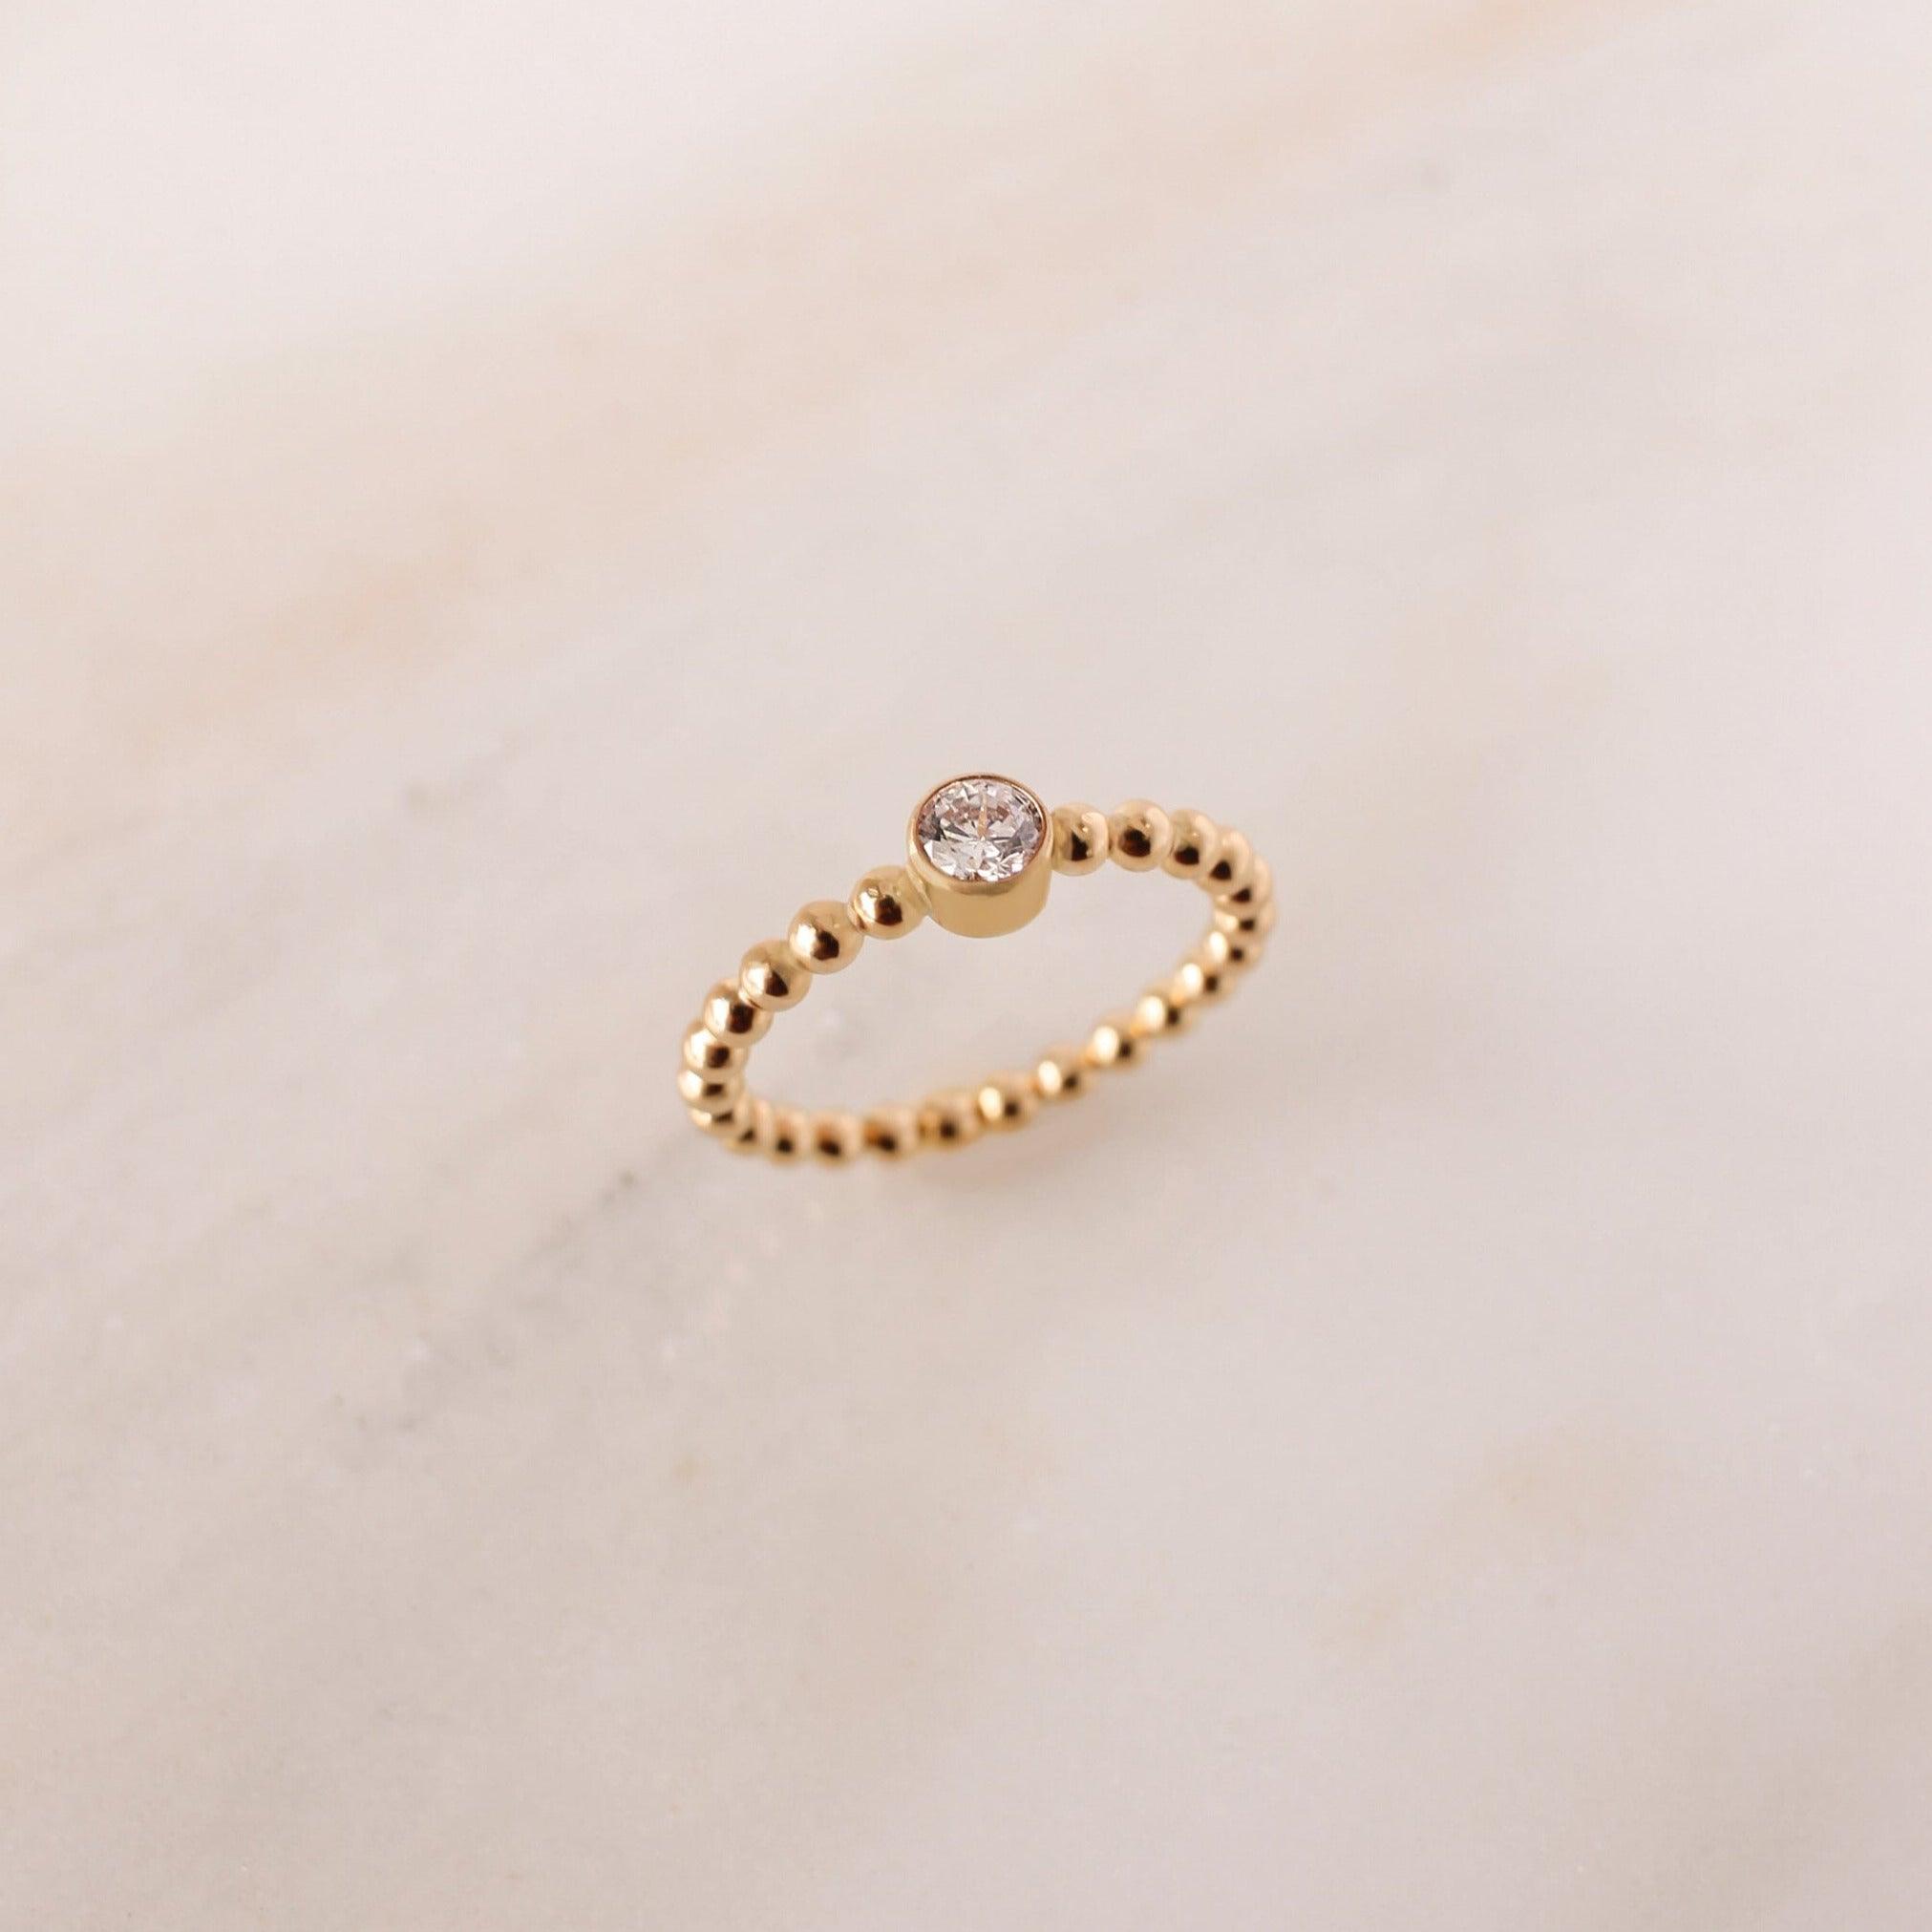 Mia Birthstone Ring - Nolia Jewelry - Meaningful + Sustainably Handcrafted Jewelry